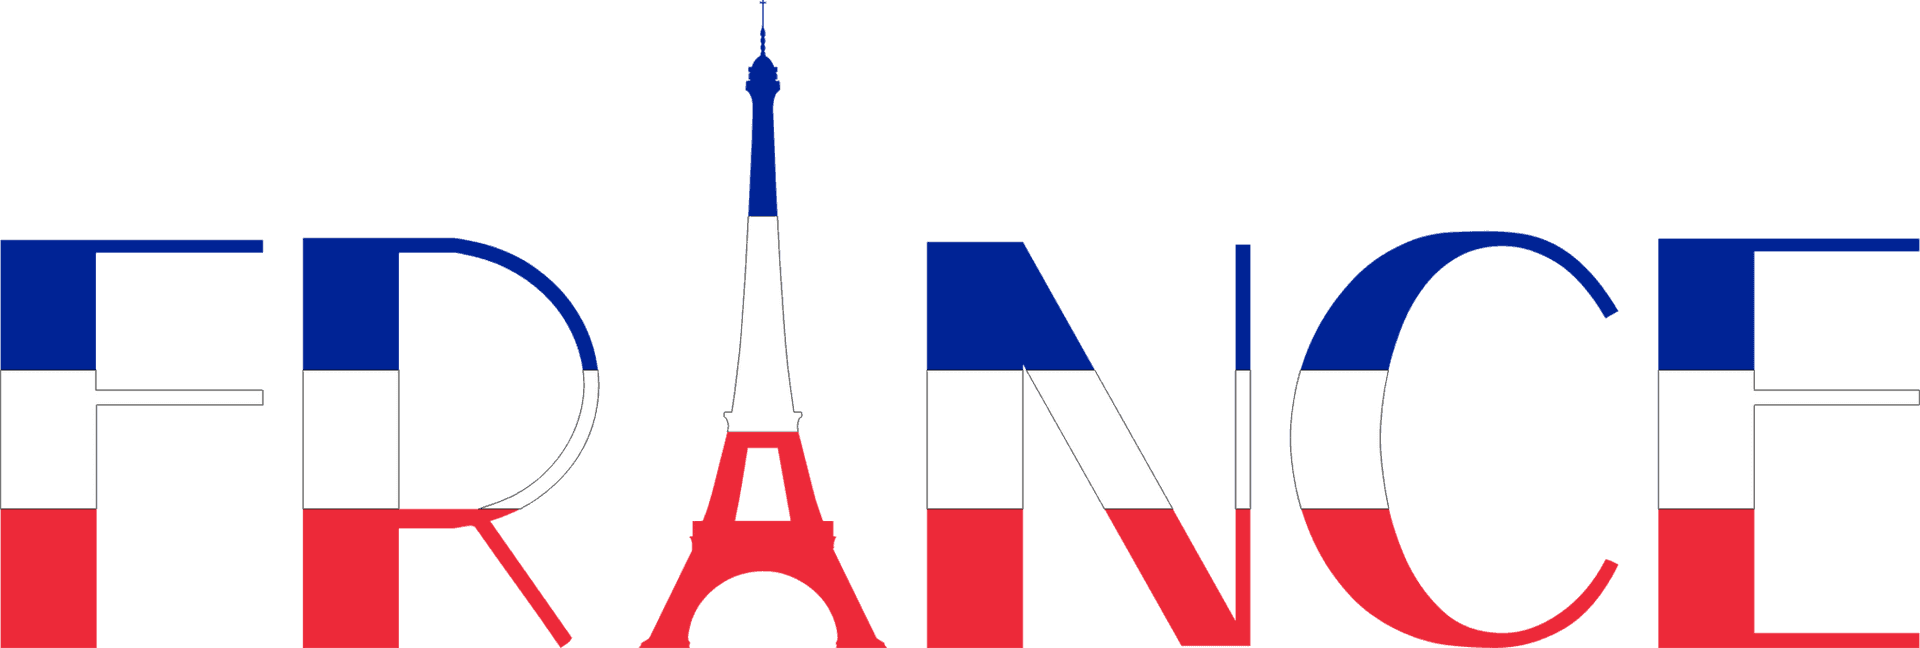 France Eiffel Tower Graphic PNG